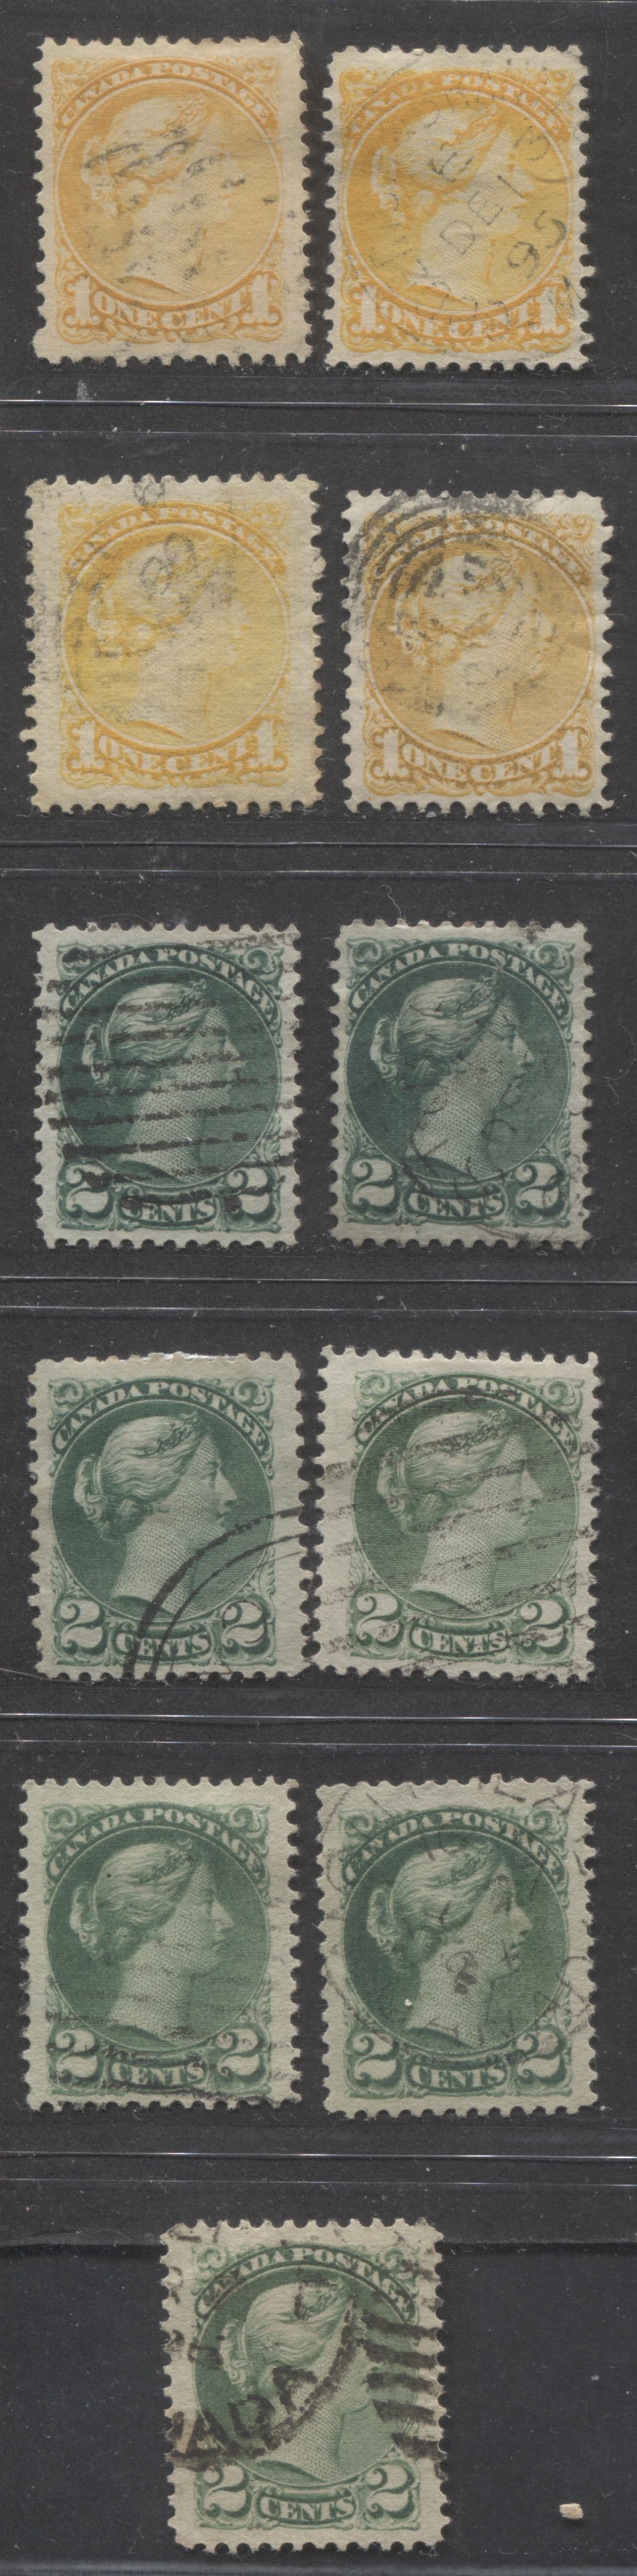 Lot 207 Canada #35, 35i, 36, 36d 1c, 2c Yellow, Green & Blue Green Queen Victoria, 1870-1897 Small Queen Issue, 11 Fine & VF Used Singles, All Different Papers and Shades, Montreal and 2nd Ottawa Printings